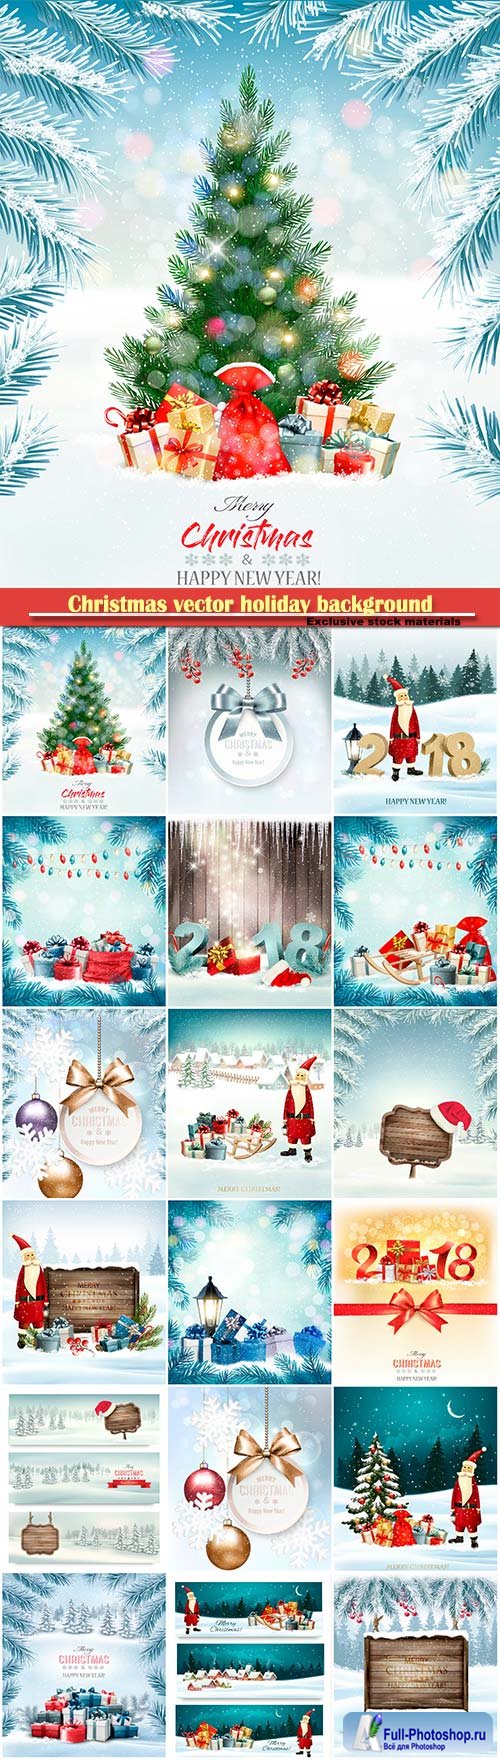 Christmas vector holiday background with presents and garland, holiday background with Christmas tree